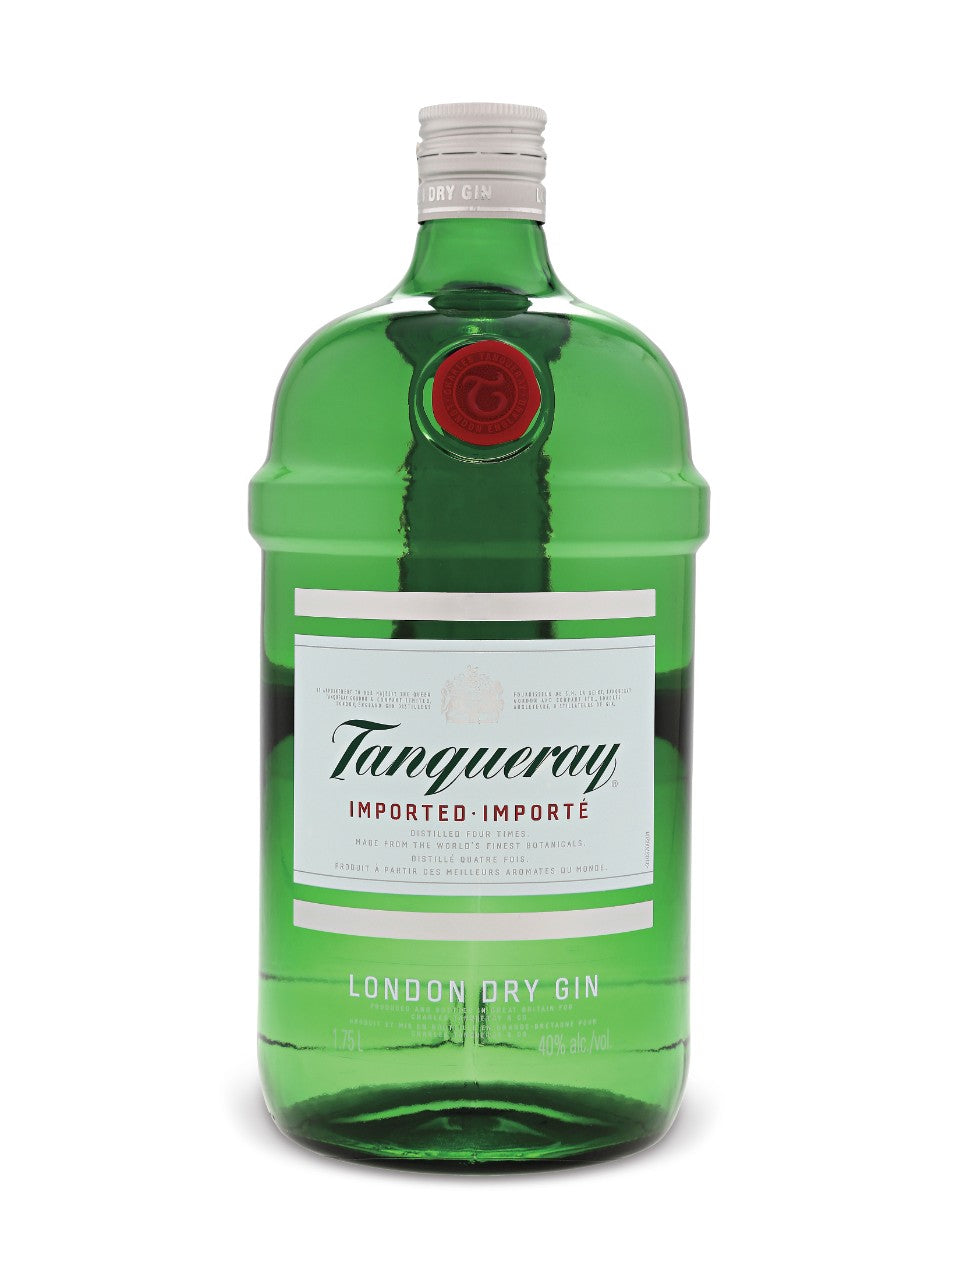 TANQUERAY LONDON DRY GIN 1.75L